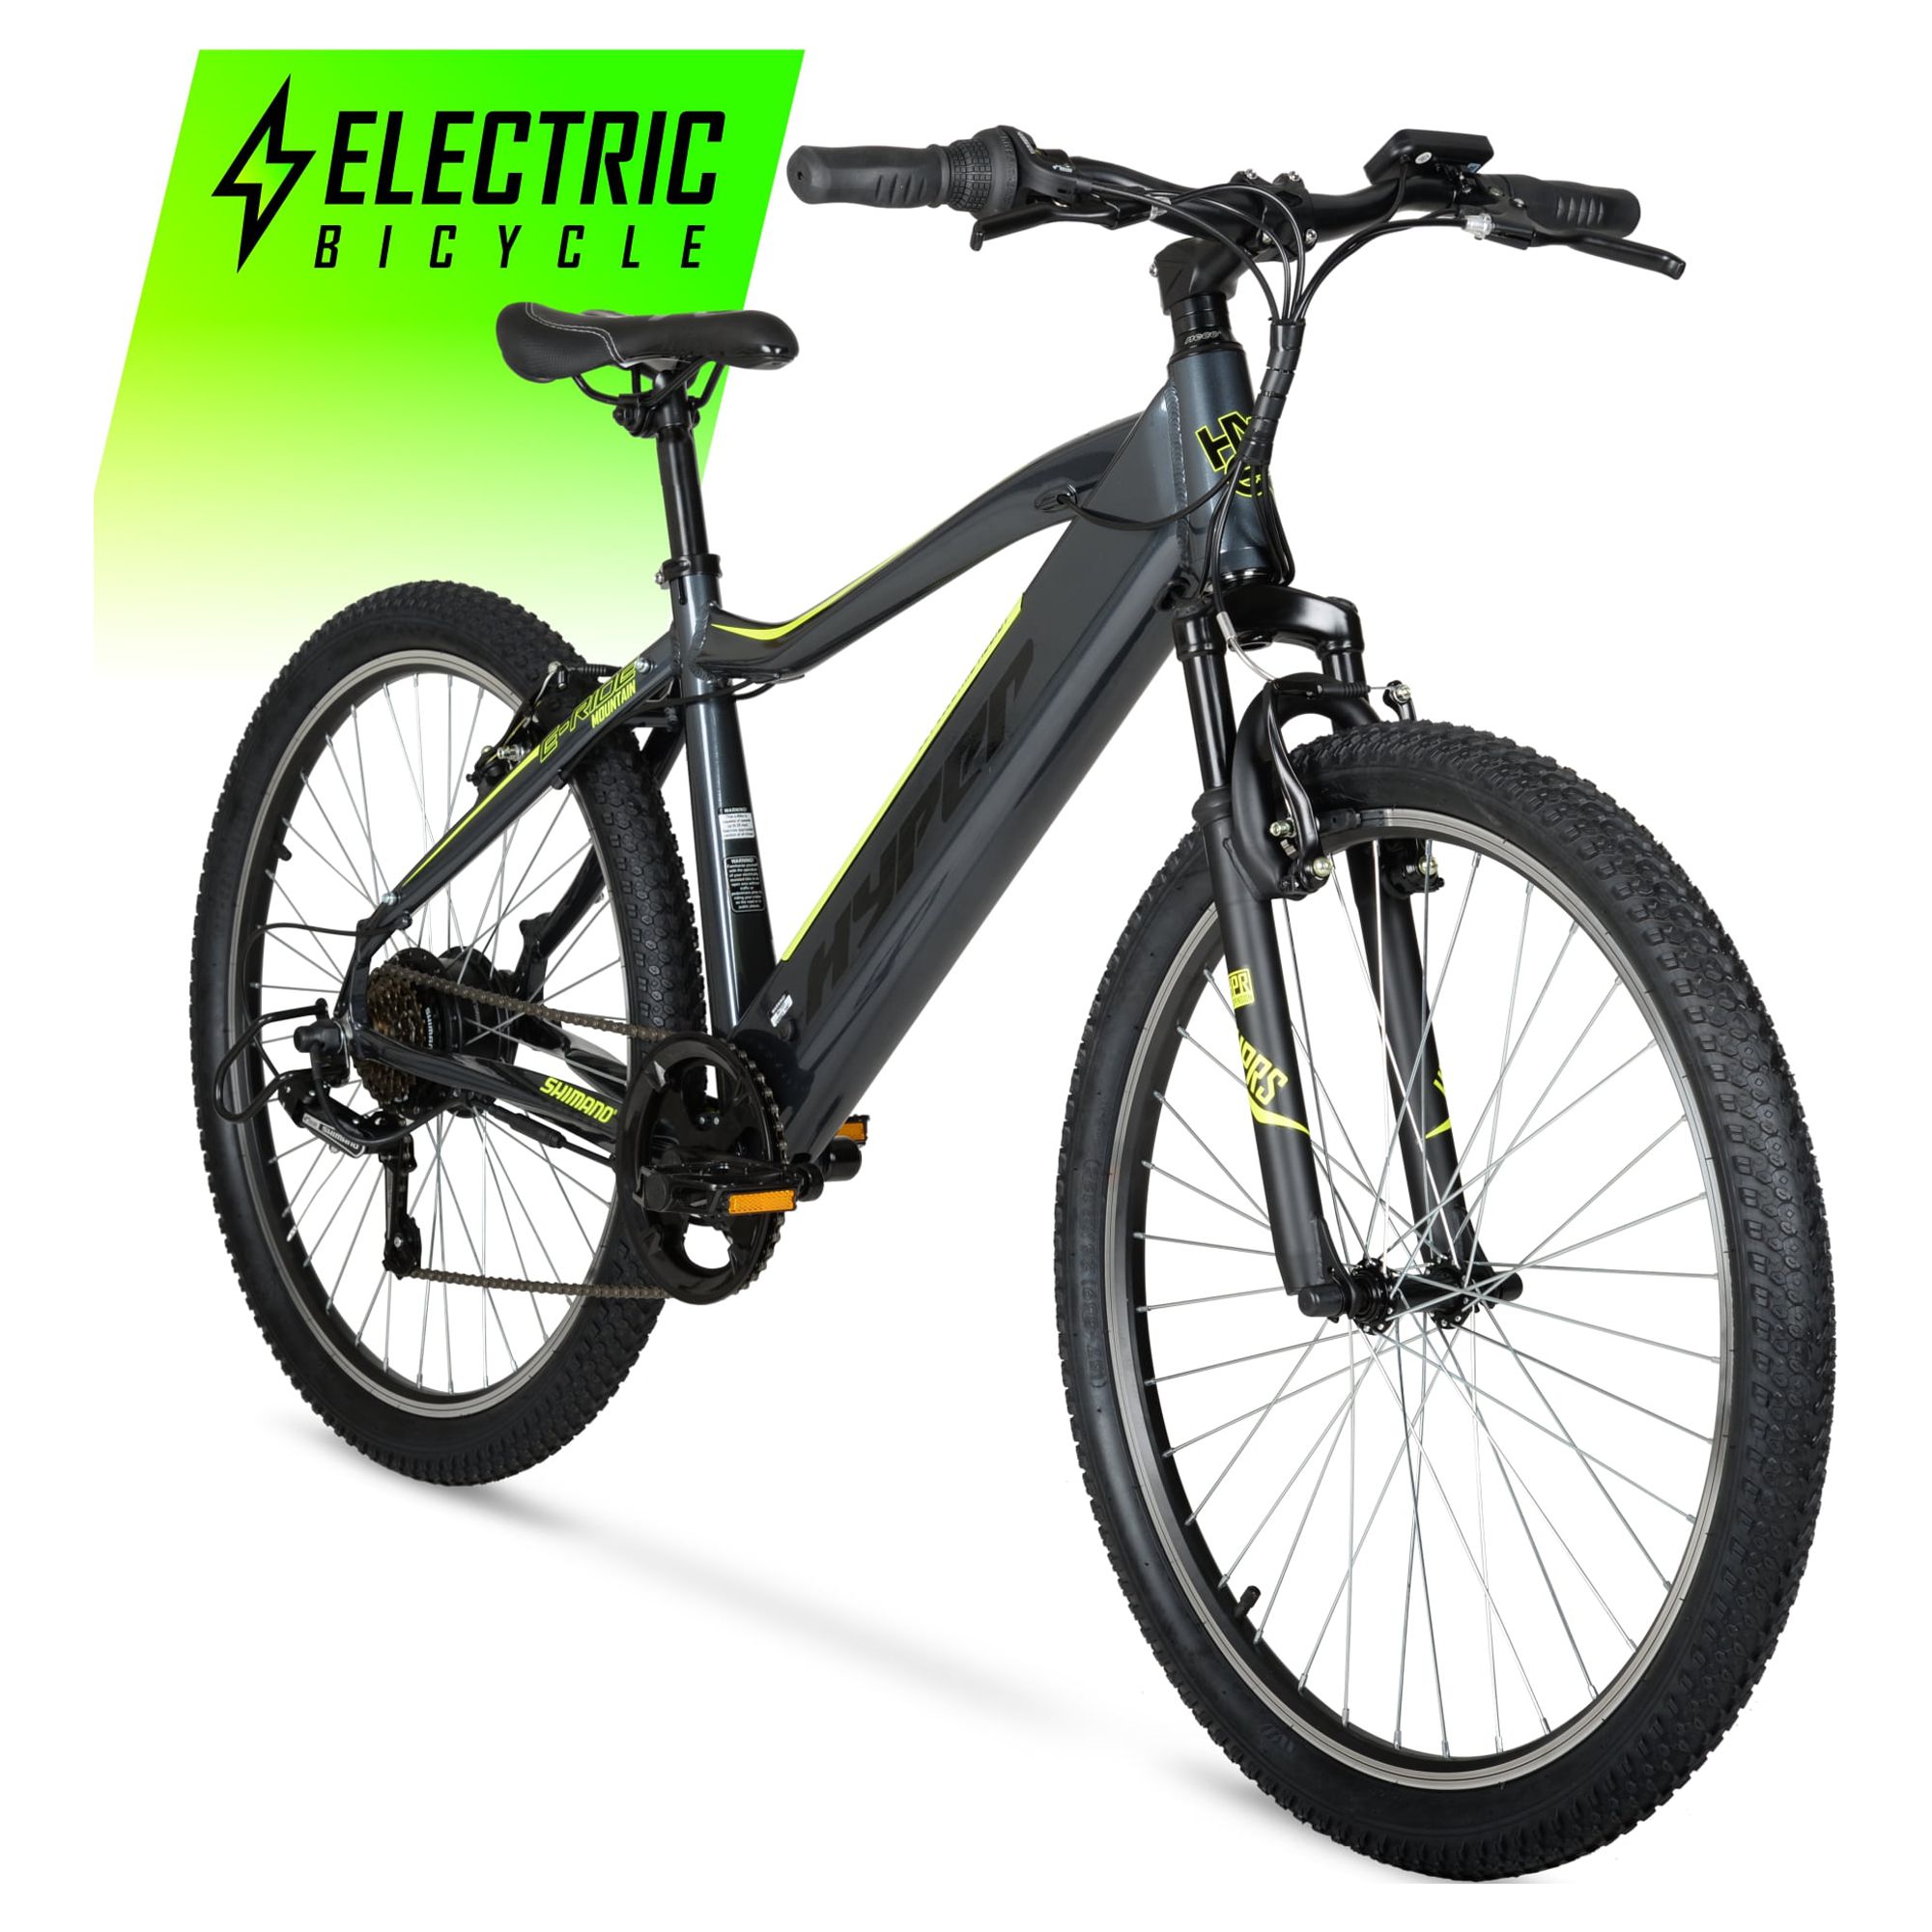 Hyper Bicycles 26" 36V Electric Mountain Bike for Adults, Pedal-Assist, 250W E-Bike Motor, Black - image 3 of 17